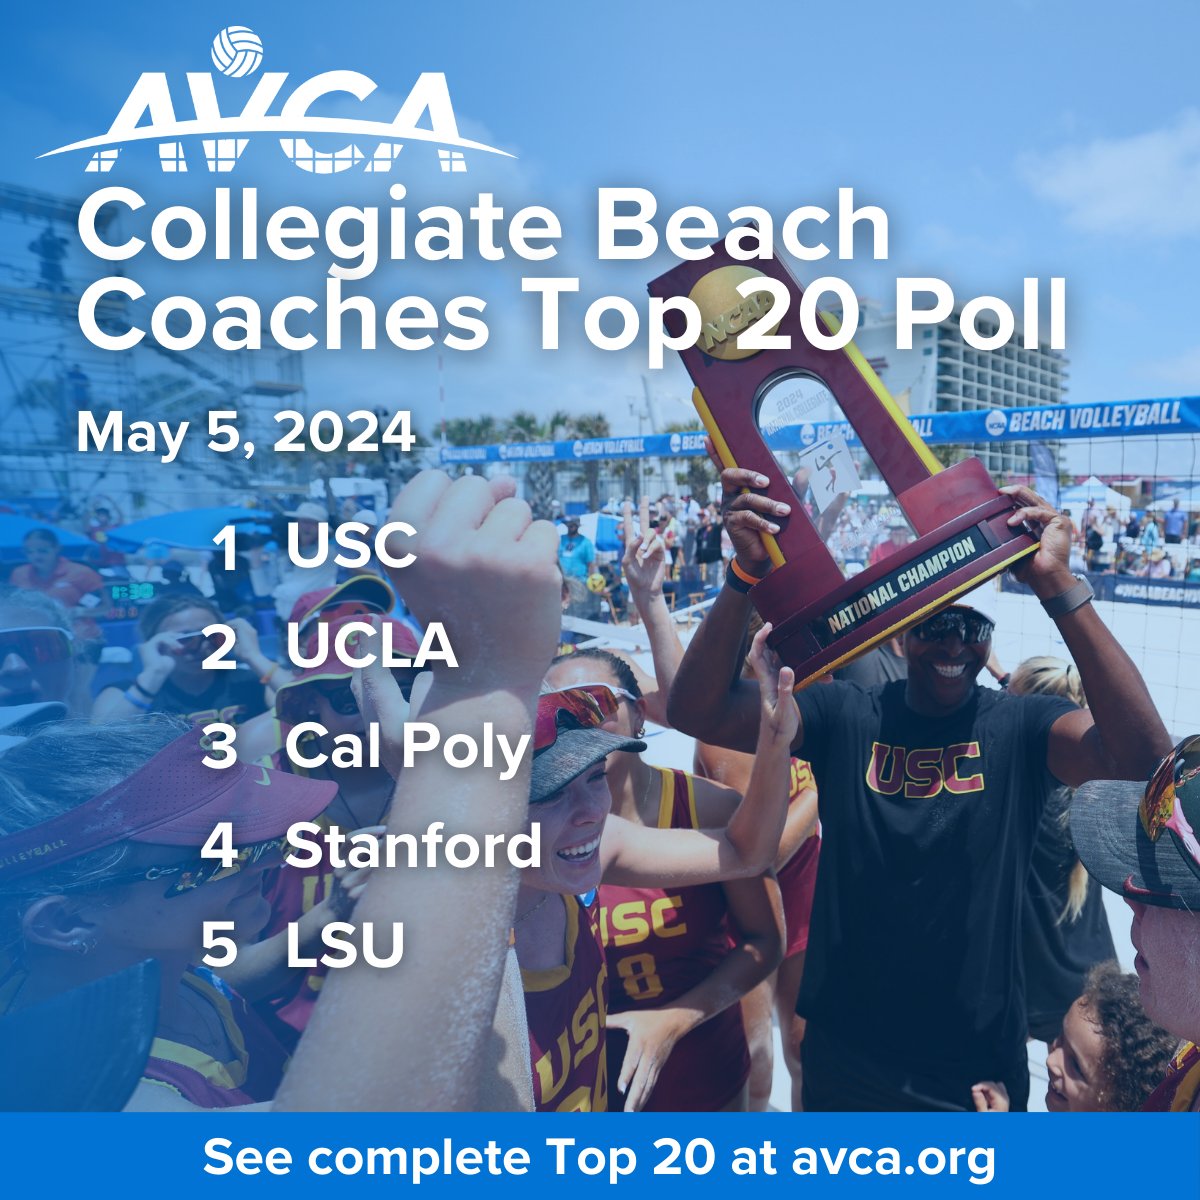 Following its historical four-peat, @USCBeach closes the 2024 season atop the final AVCA Collegiate Beach Poll. Coach Dain Blanton’s squad beat crosstown rival UCLA to earn another trophy and finished the year with a 37-5 record. avca.org/polls-awards/p… #WeAreAVCA